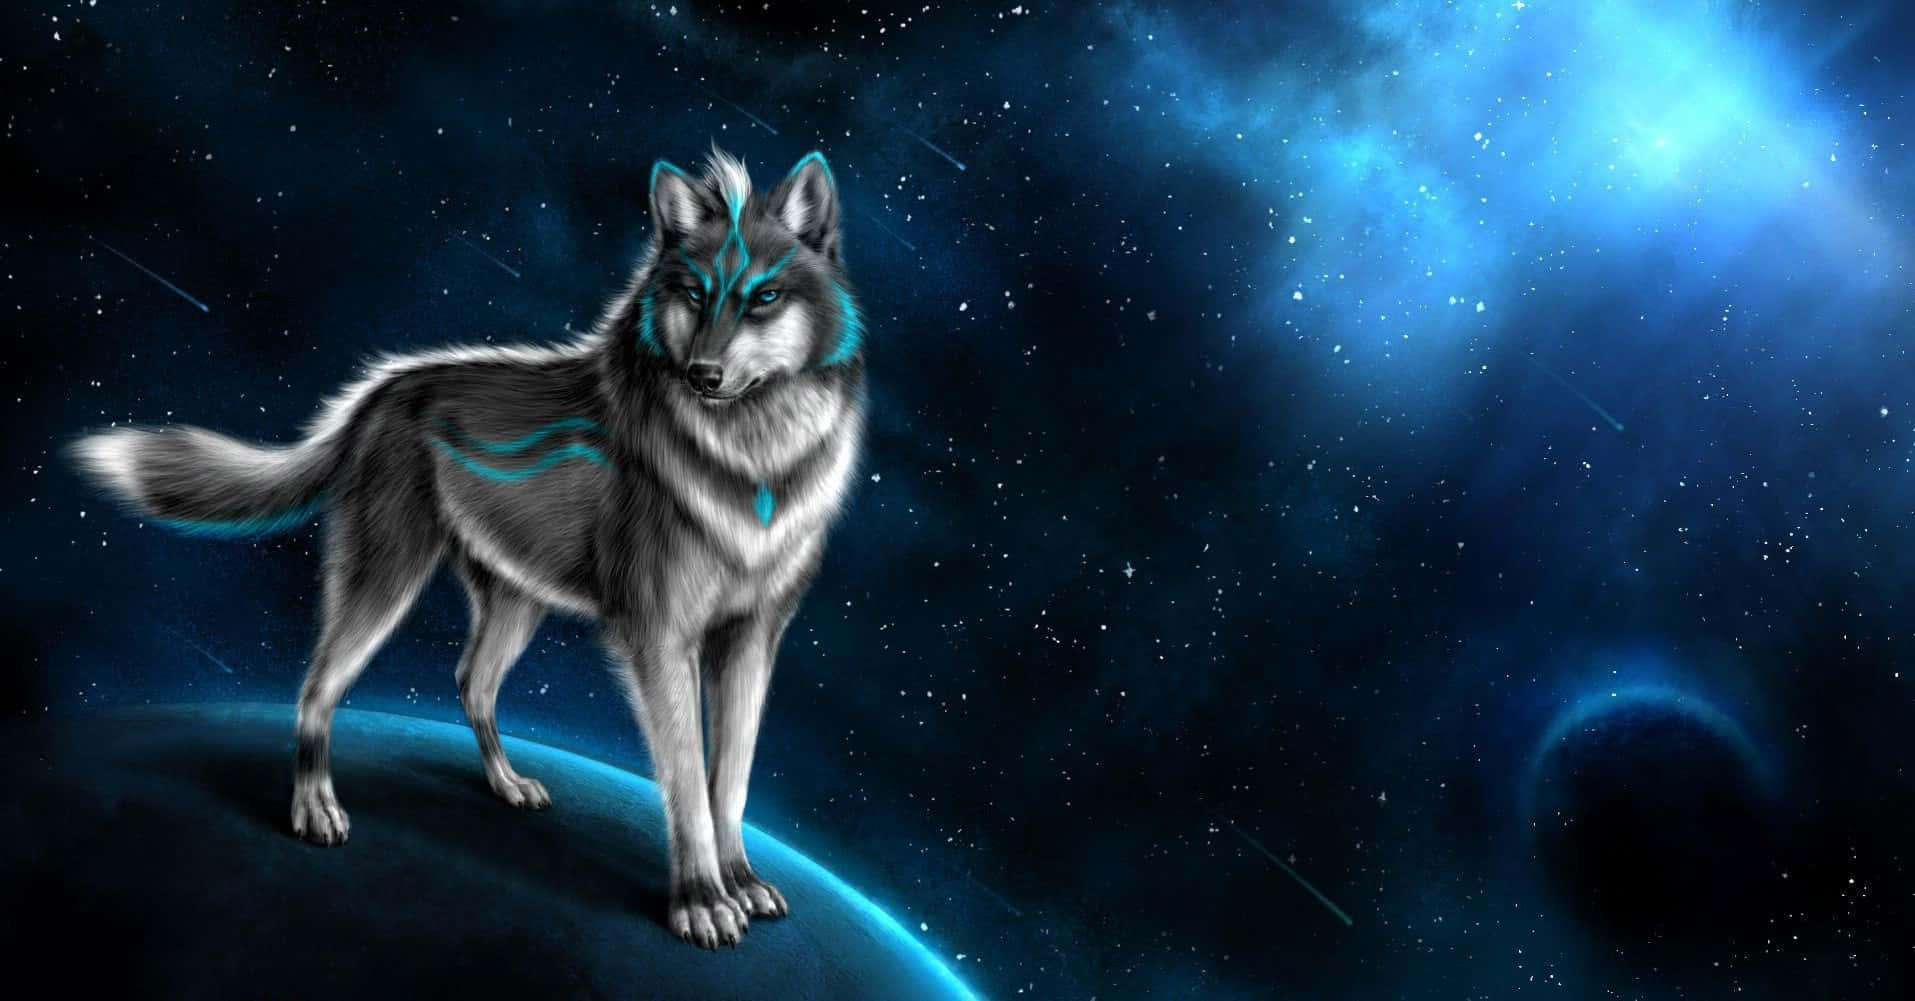 Majestic Mythical Wolf in a Magical Forest Wallpaper